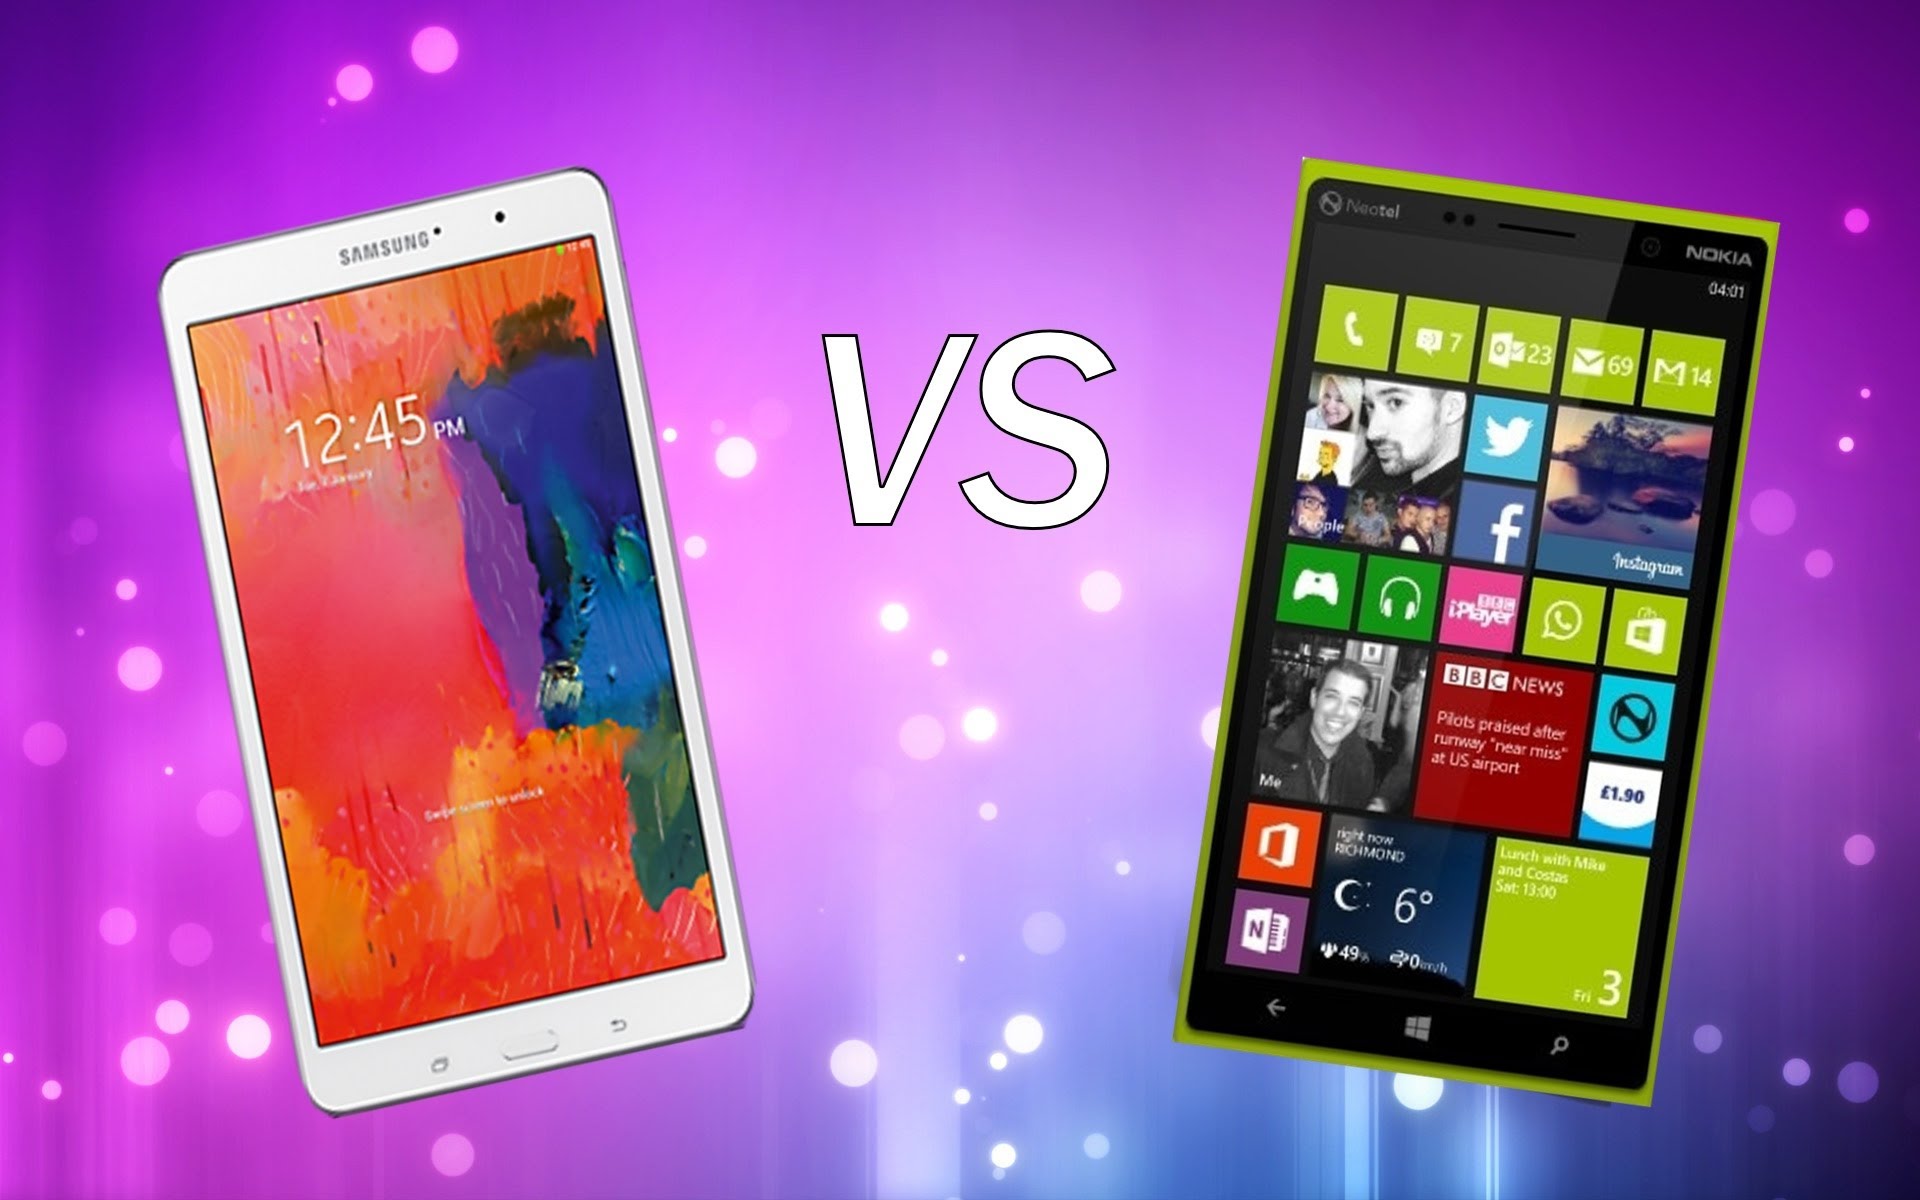 Windows Phone vs Android - Which is best? - IFTW